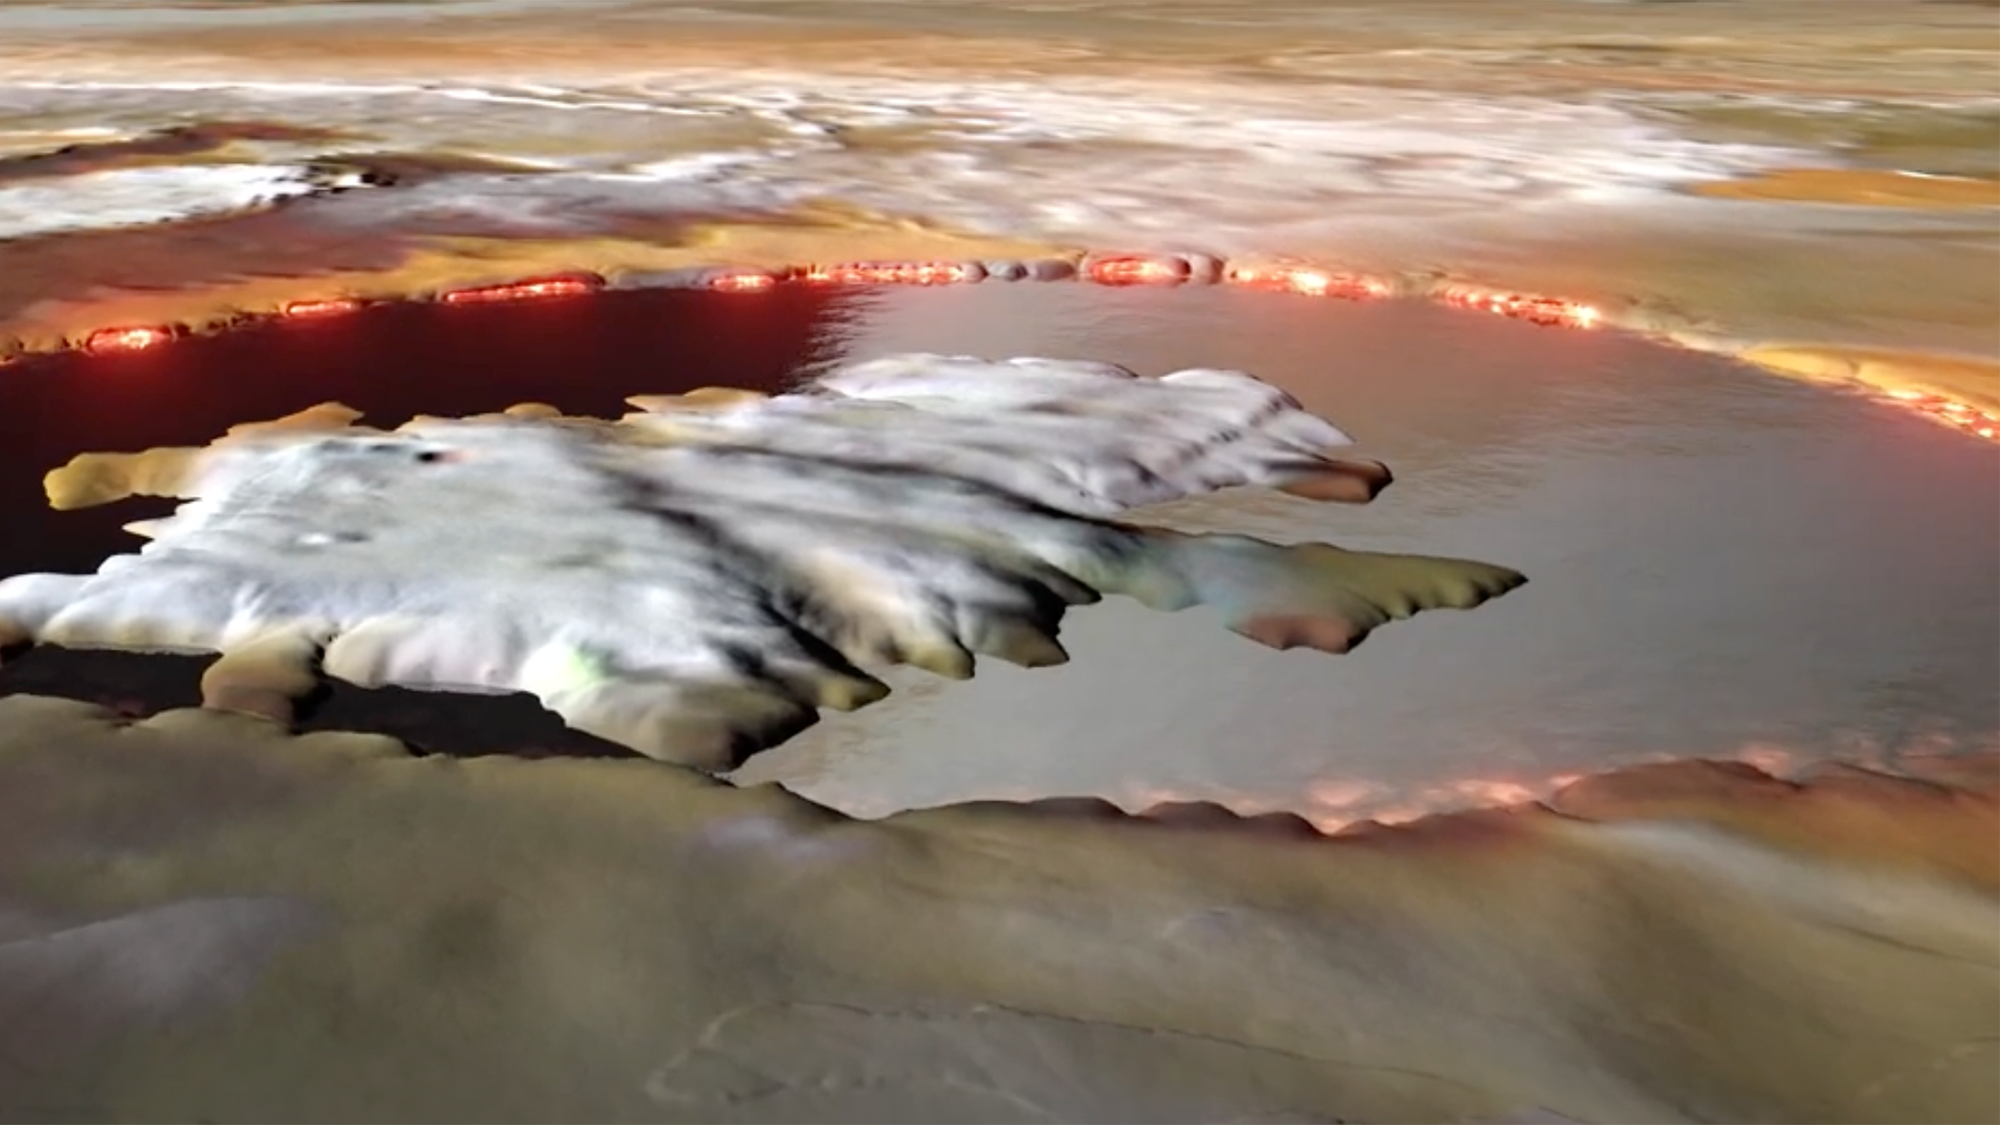 an artist's illustration of a lava lake on one of jupiter's moons. it is primarily black as the magma has cooled with orange lava encircling it